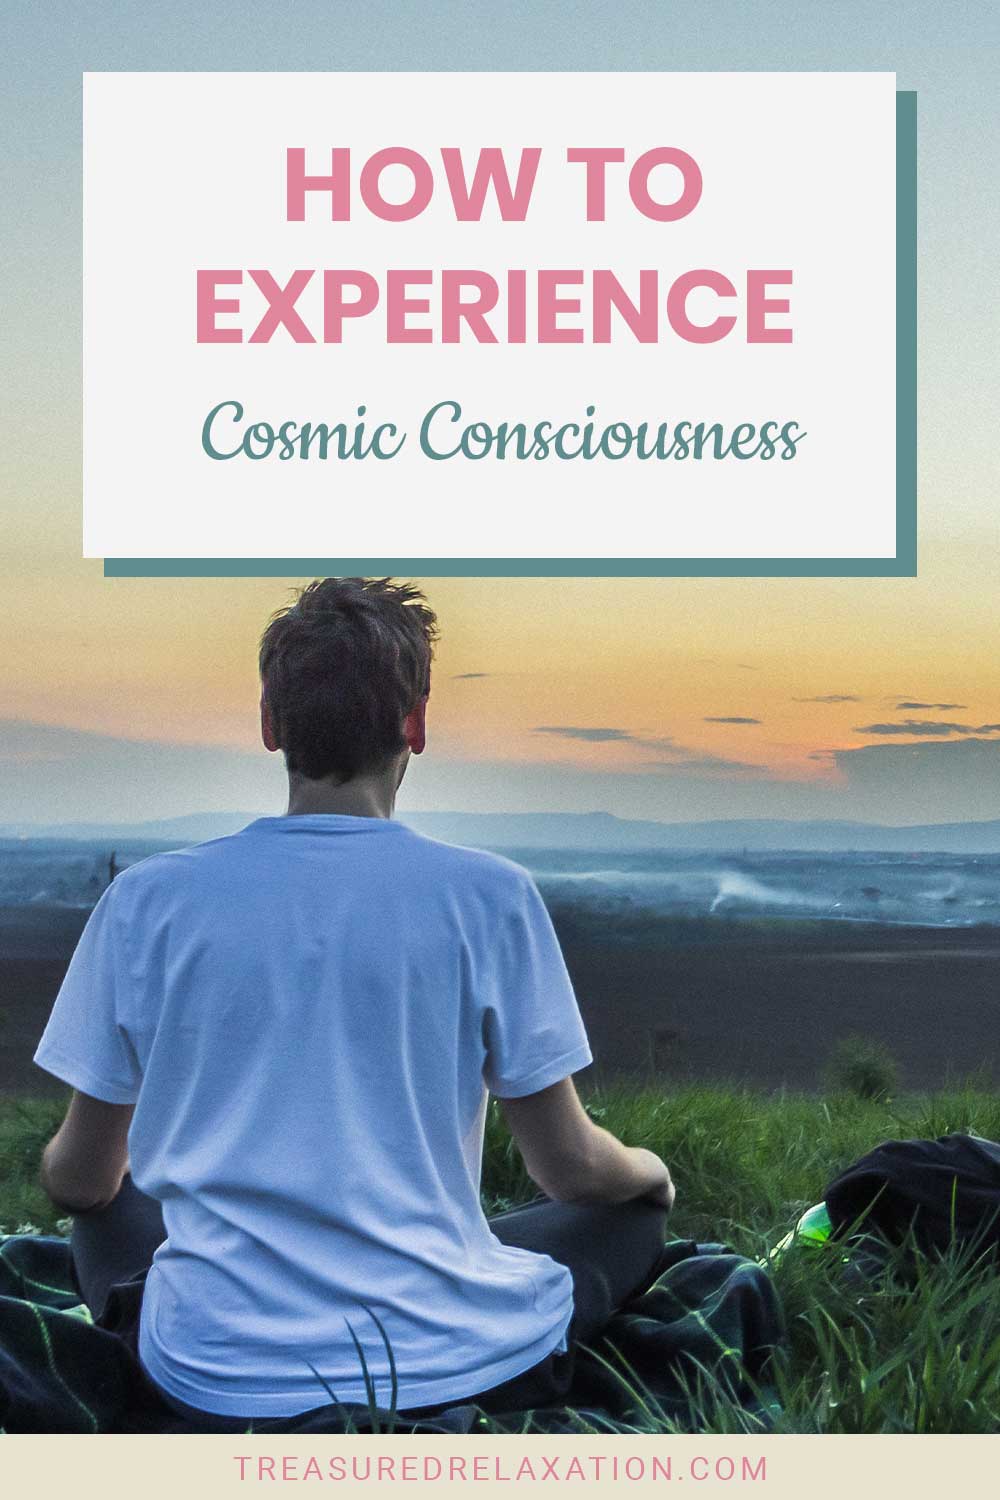 Man in white t-shirt sitting on grass facing a beach - How to Experience Cosmic Consciousness?